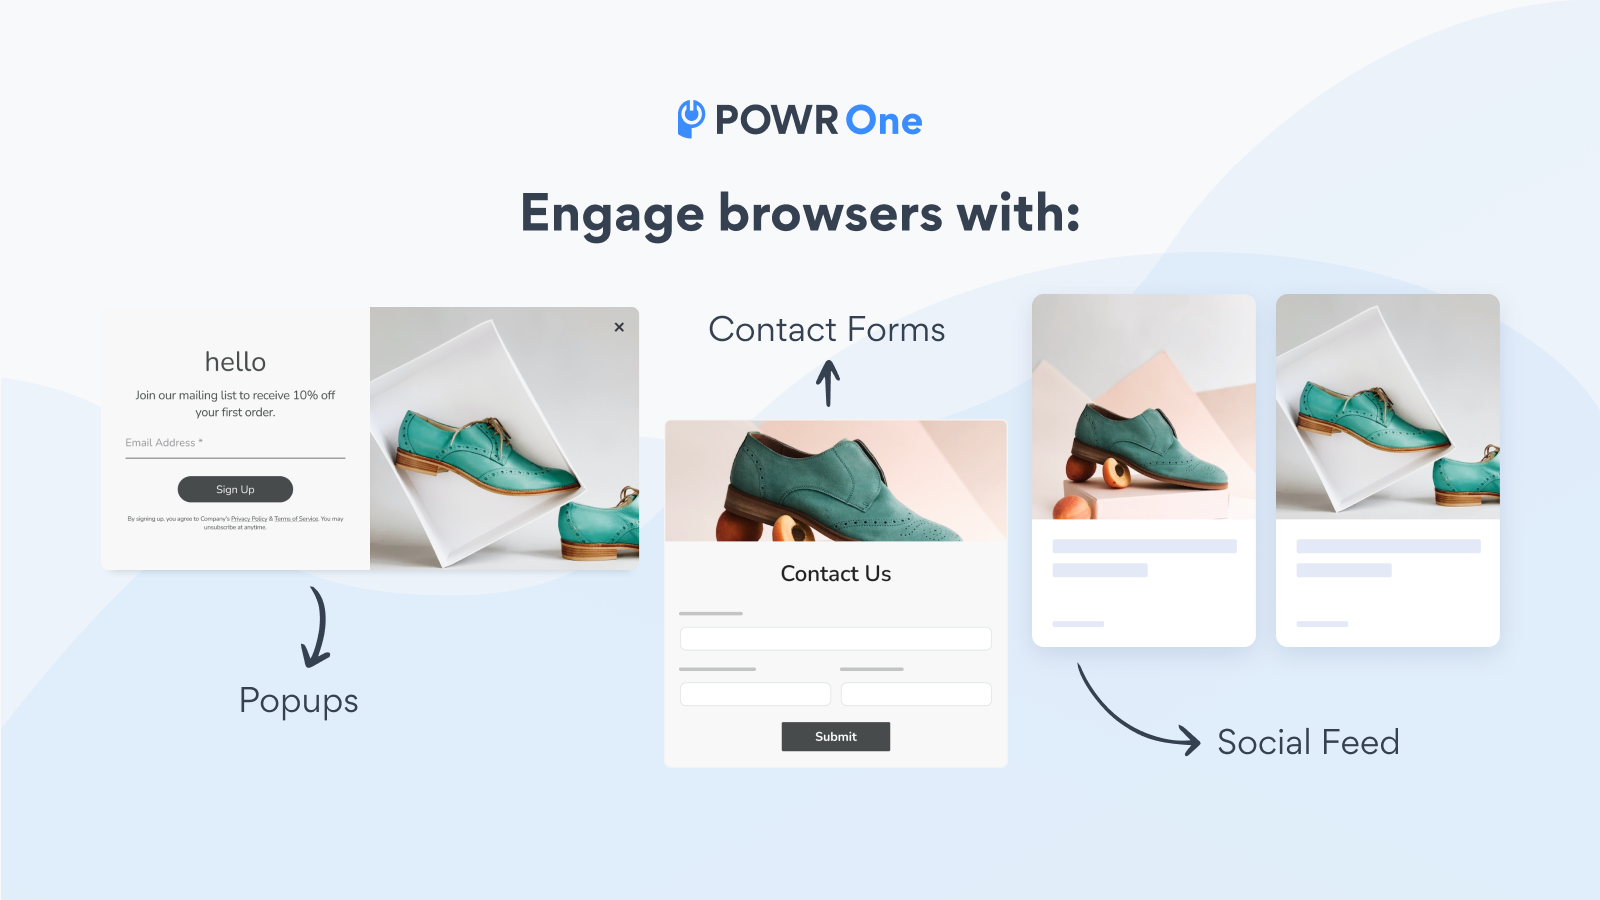 Engage browsers with popups, contact forms, and social feed